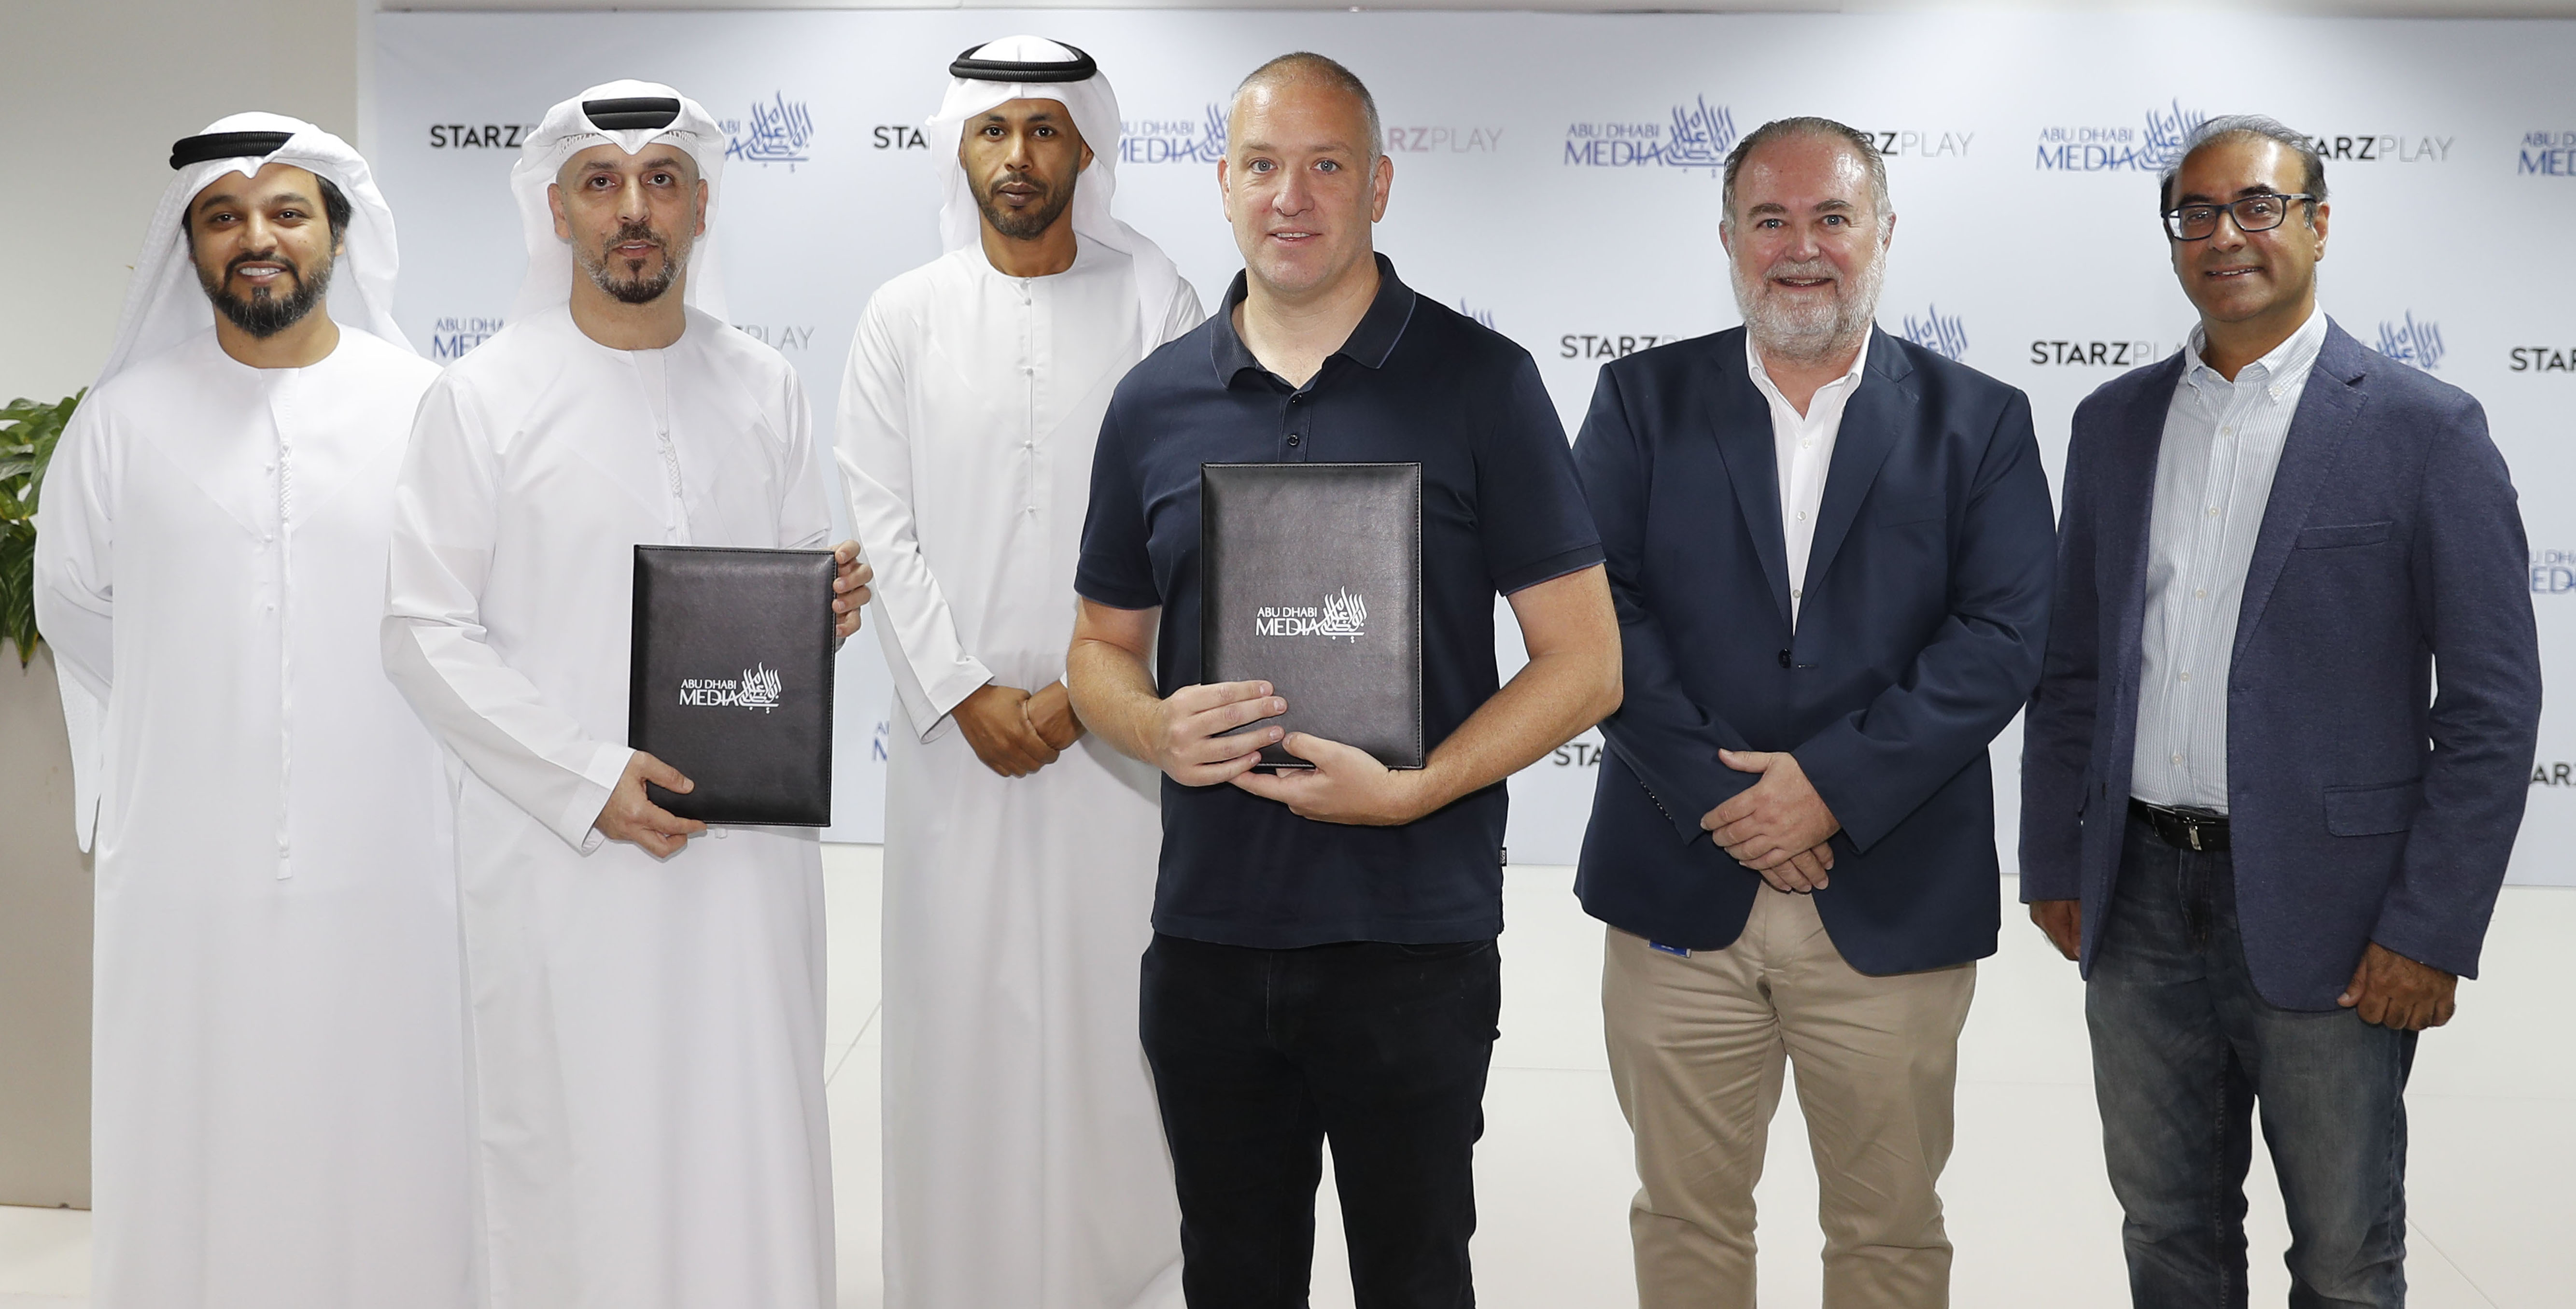 Abu Dhabi Media Appoints Starzplay as the Exclusive Partner for Advertising Sales